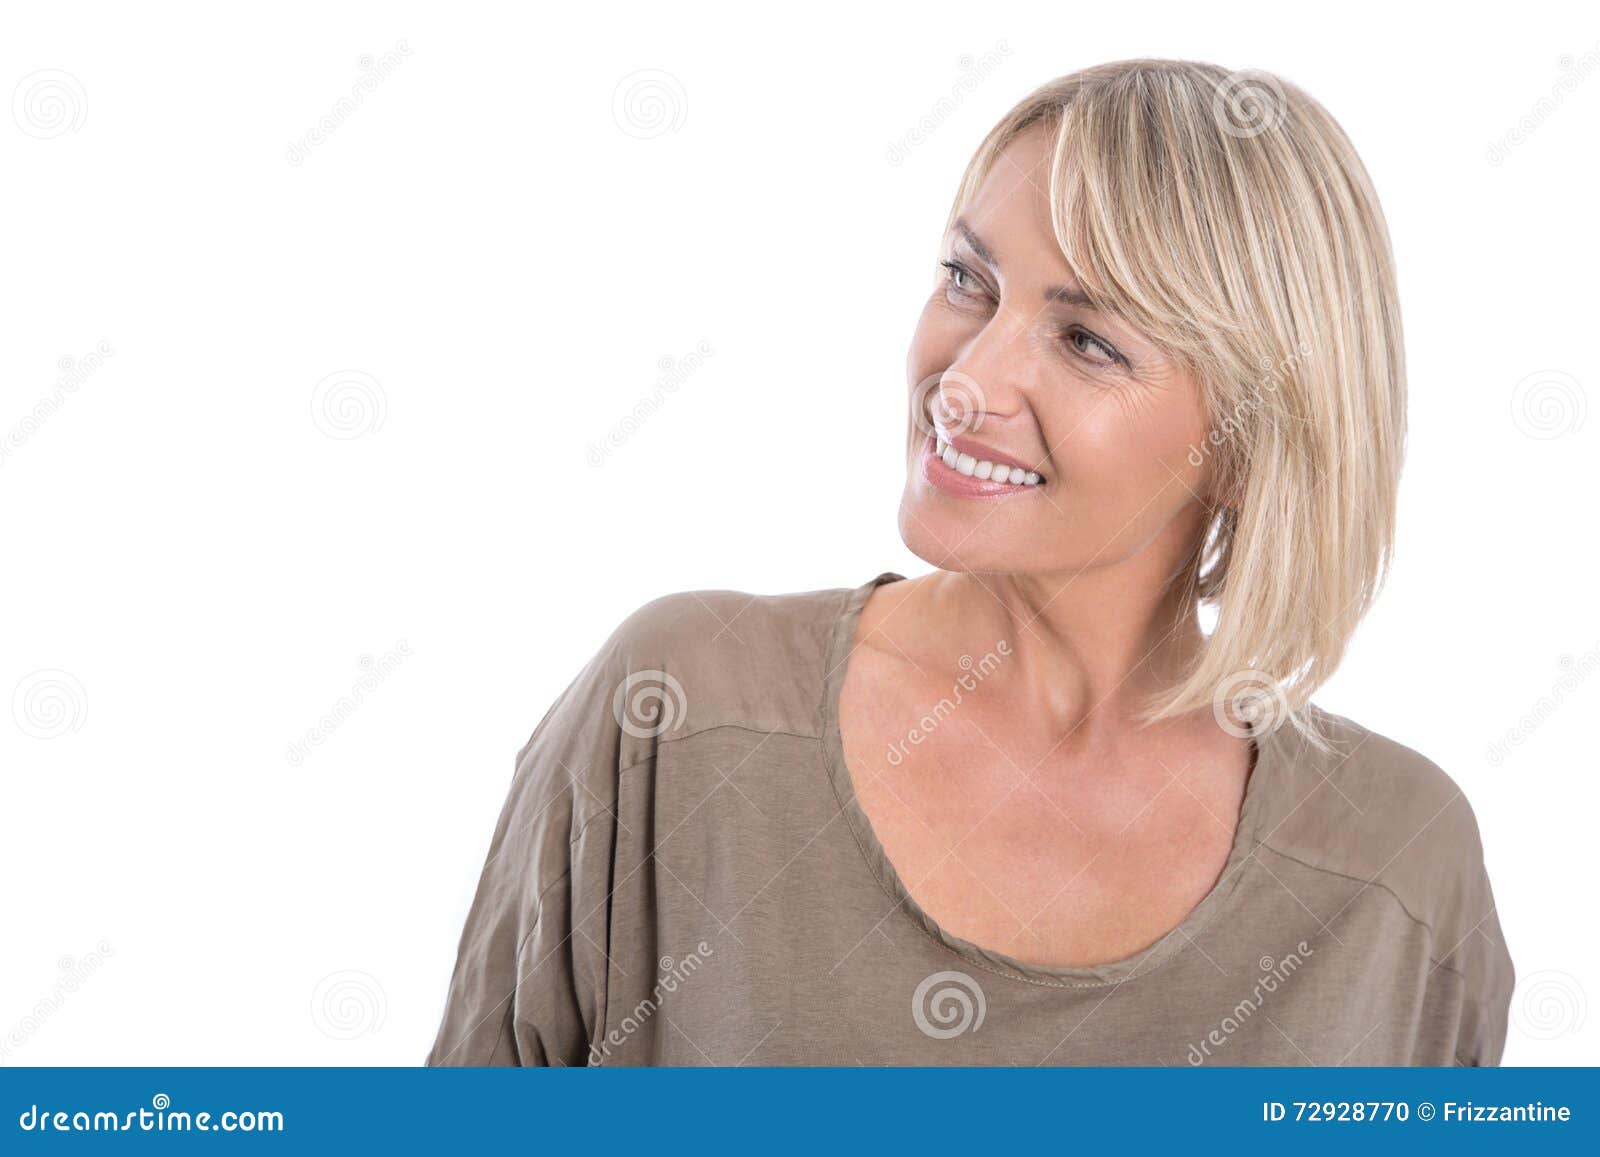 attractive middle aged blond woman looking sideways to text.